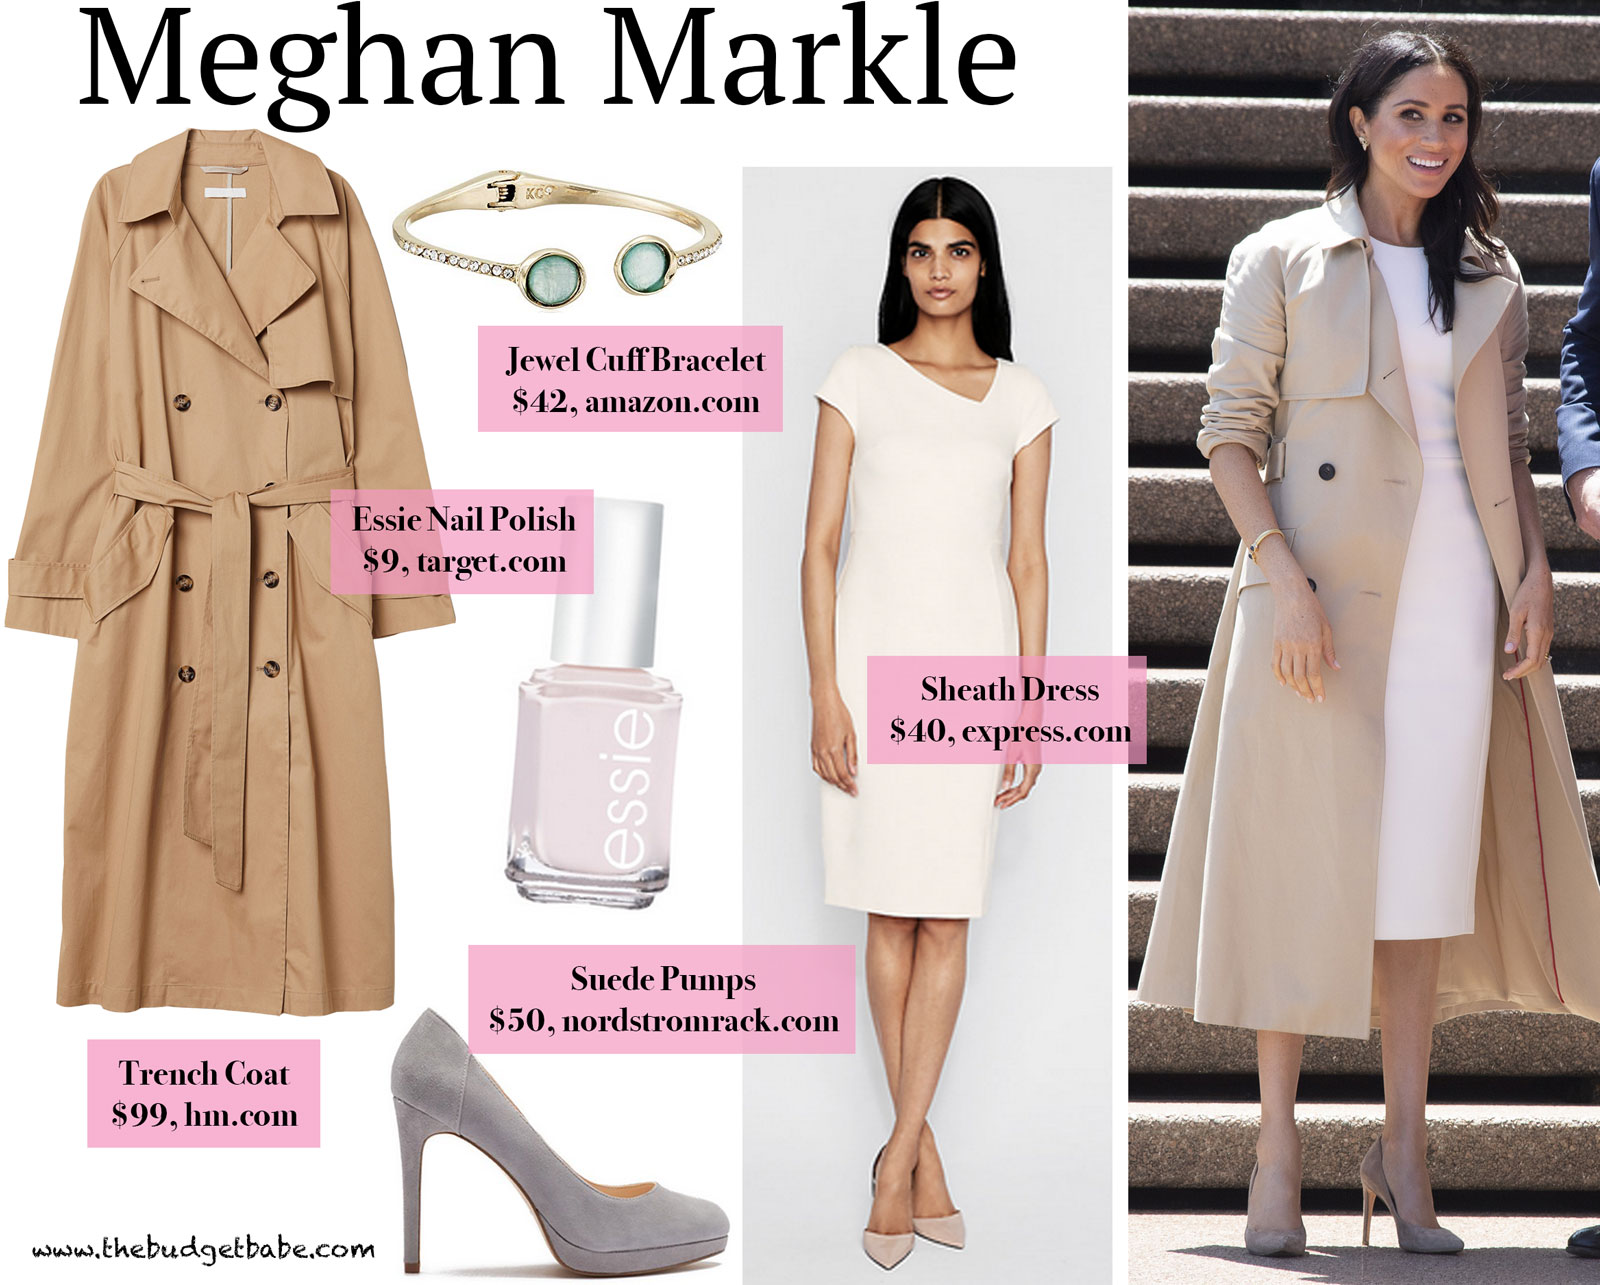 Meghan Markle Trench Coat Look for Less